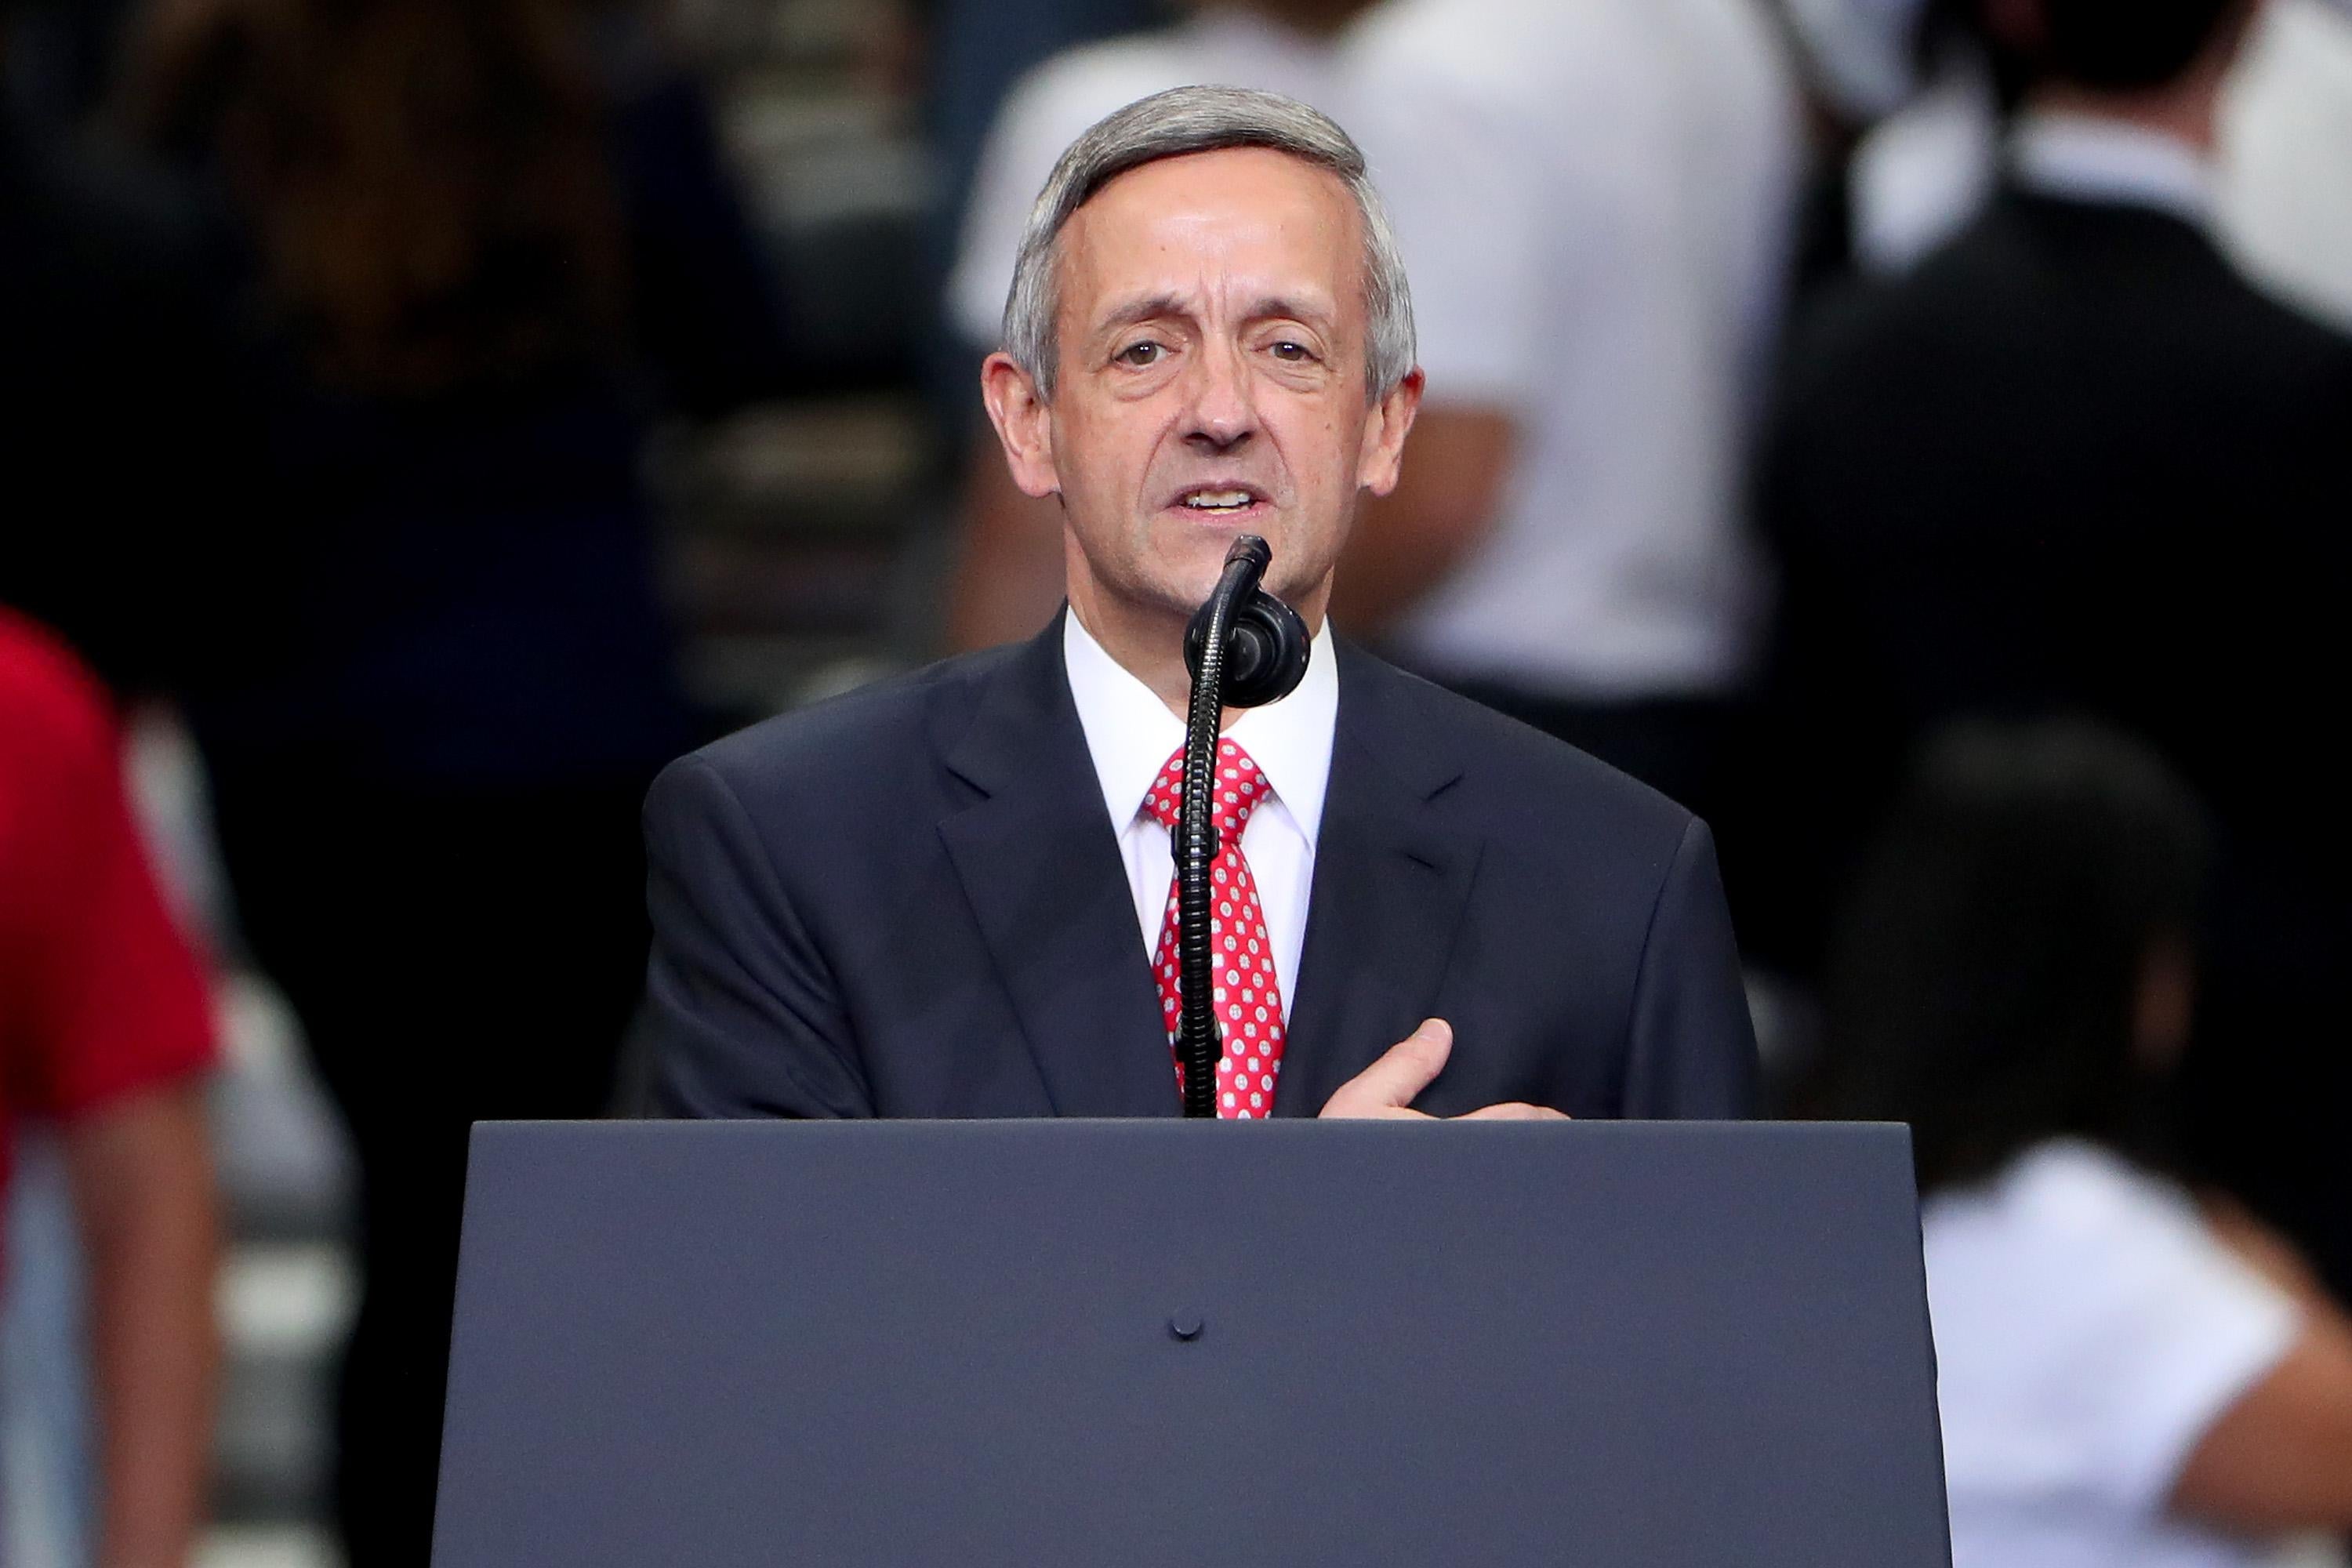 Robert Jeffress stands in front a lectern, speaking into a microphone.